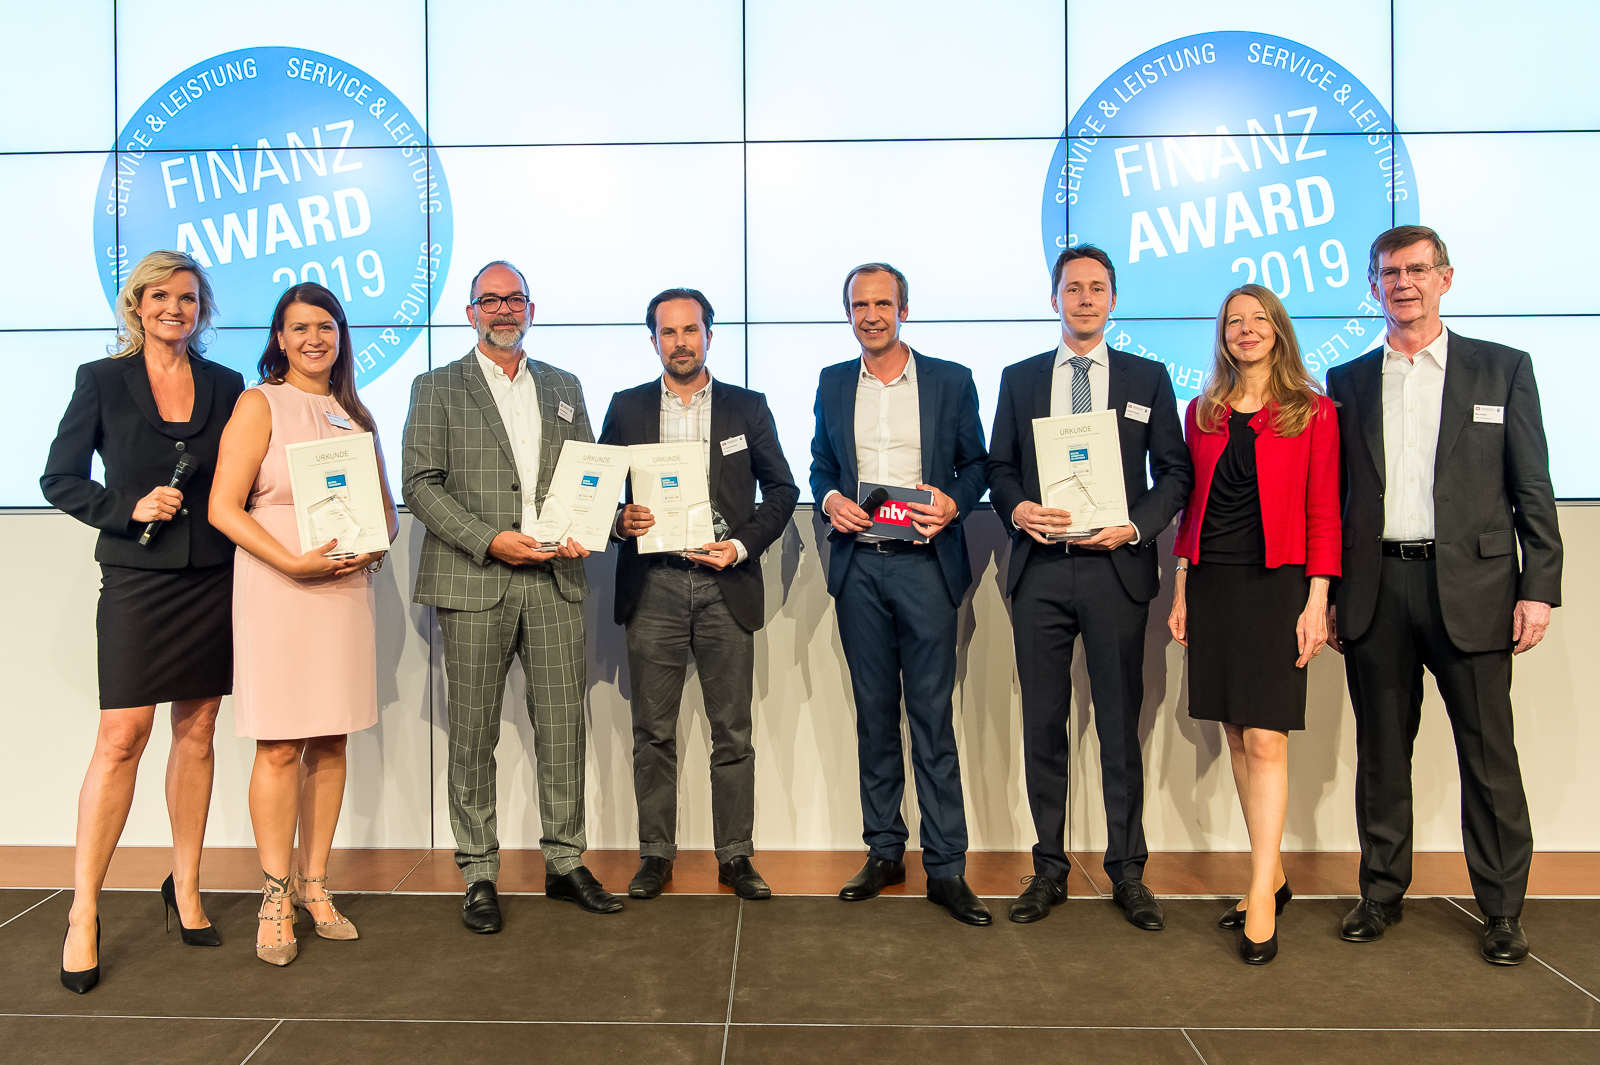 Winners of the Finanz Awards 2019 issued by the DISQ